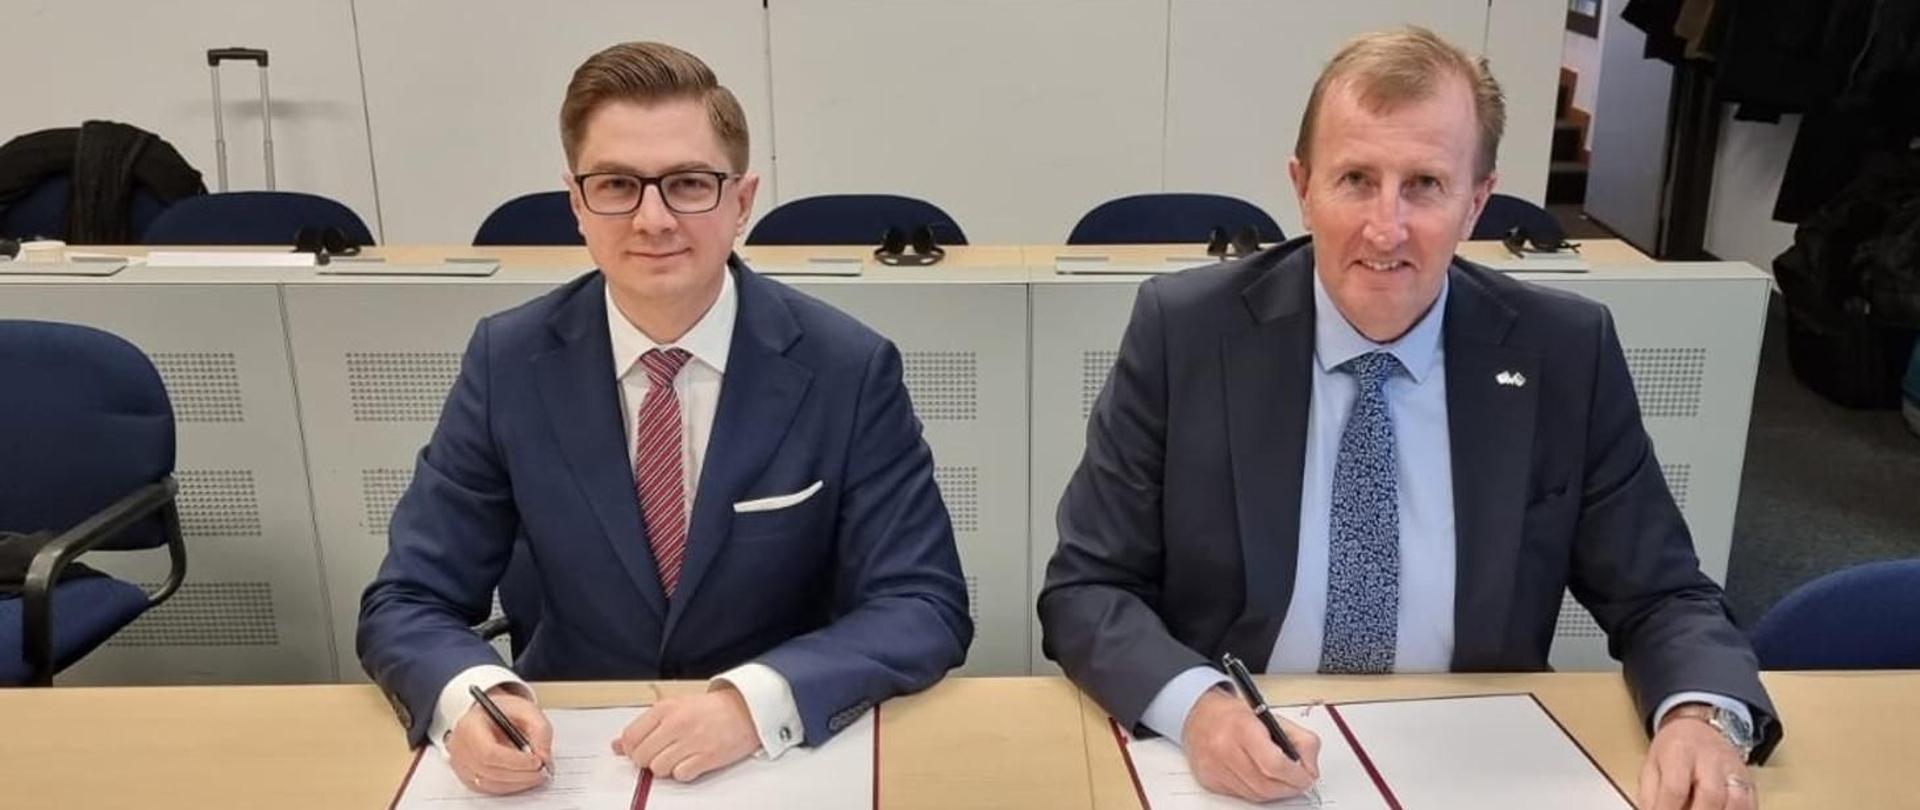 PAA President Dr Łukasz Młynarkiewicz and Mark Foy, Chief Nuclear Inspector of Great Britain sign a cooperation agreement